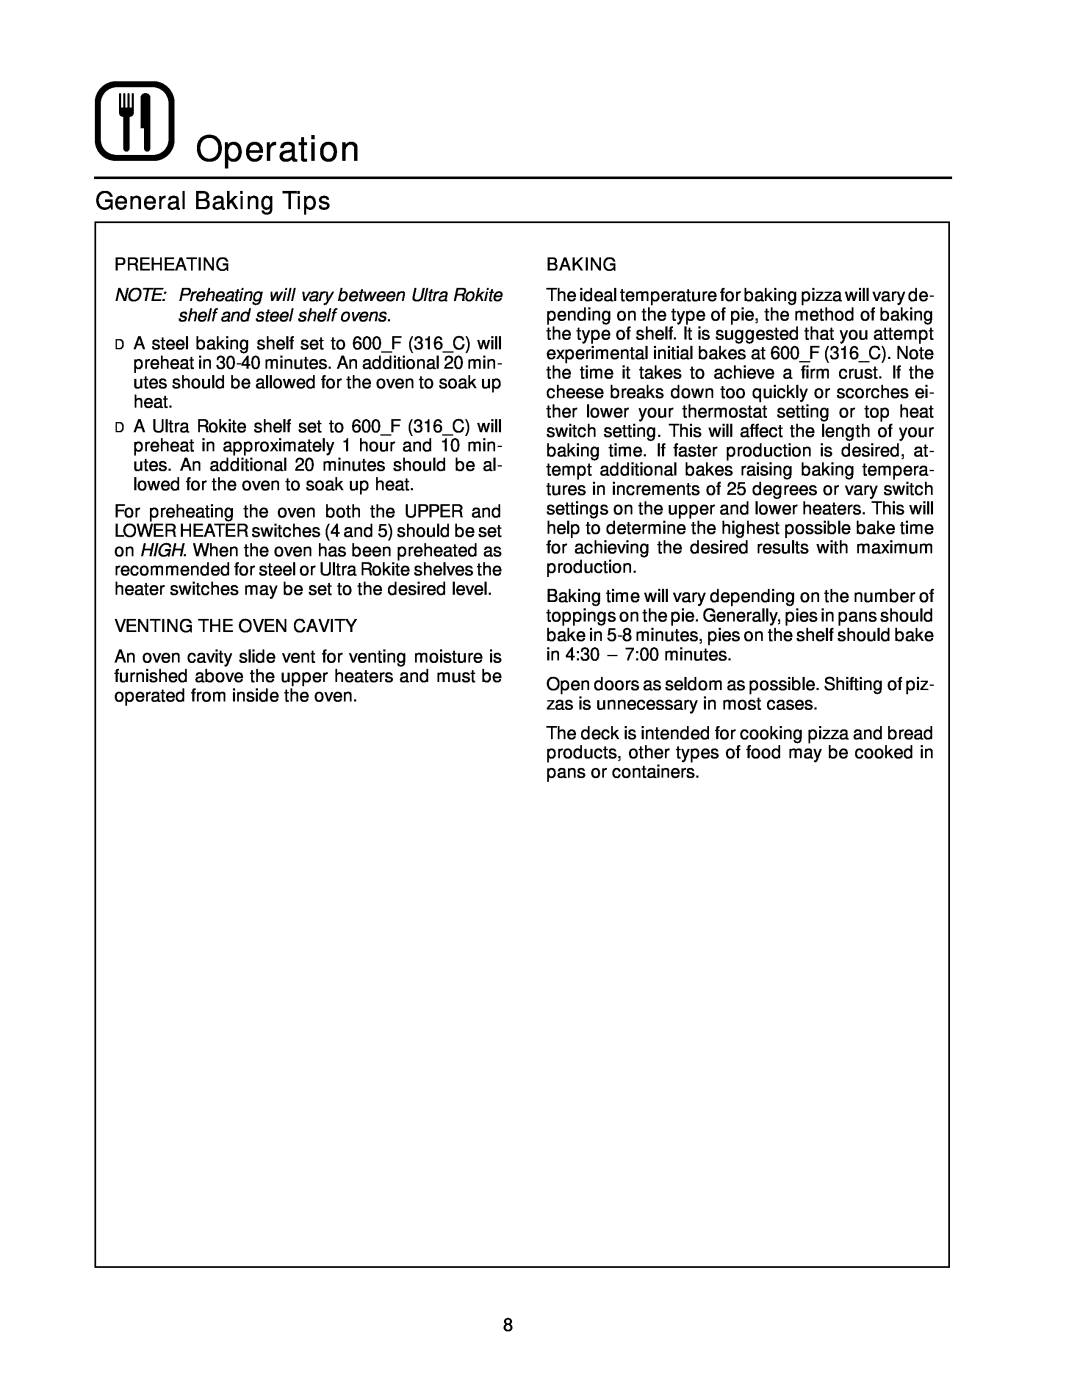 Blodgett 1200 SERIES manual Operation, General Baking Tips, Preheating, Venting The Oven Cavity 